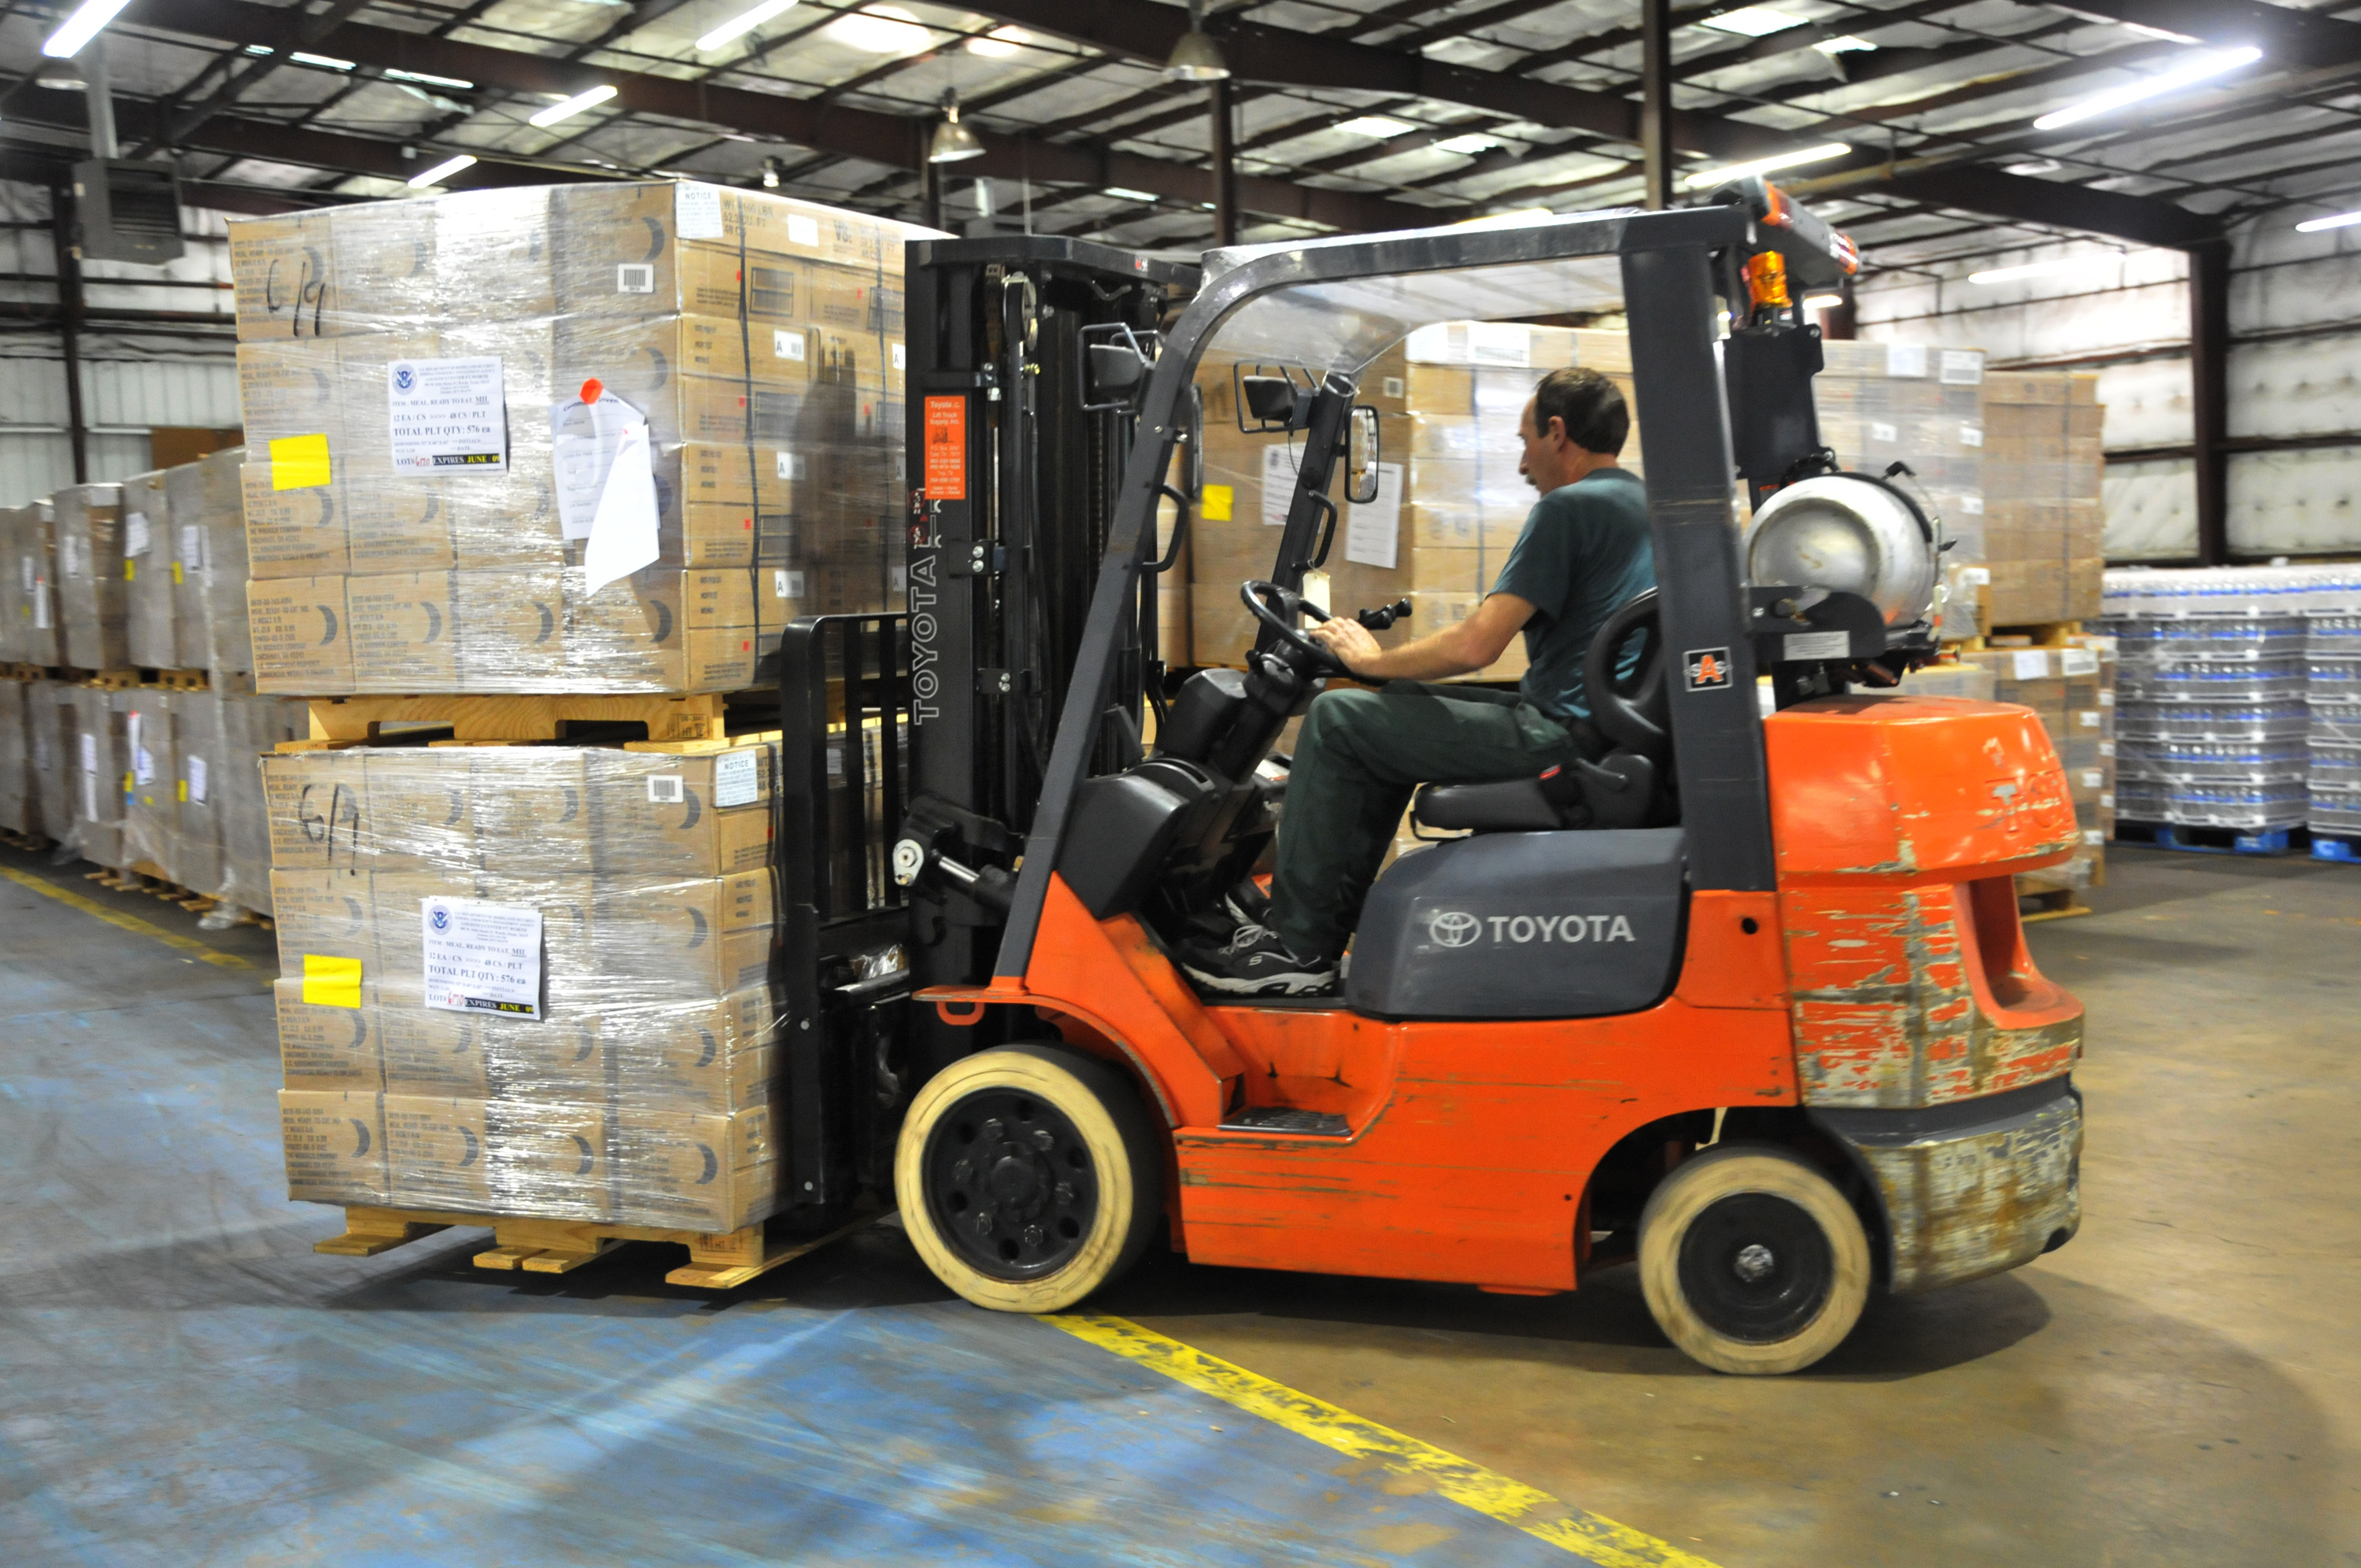 Forklift Training Certification Safety Council Of Palm Beach County Inc